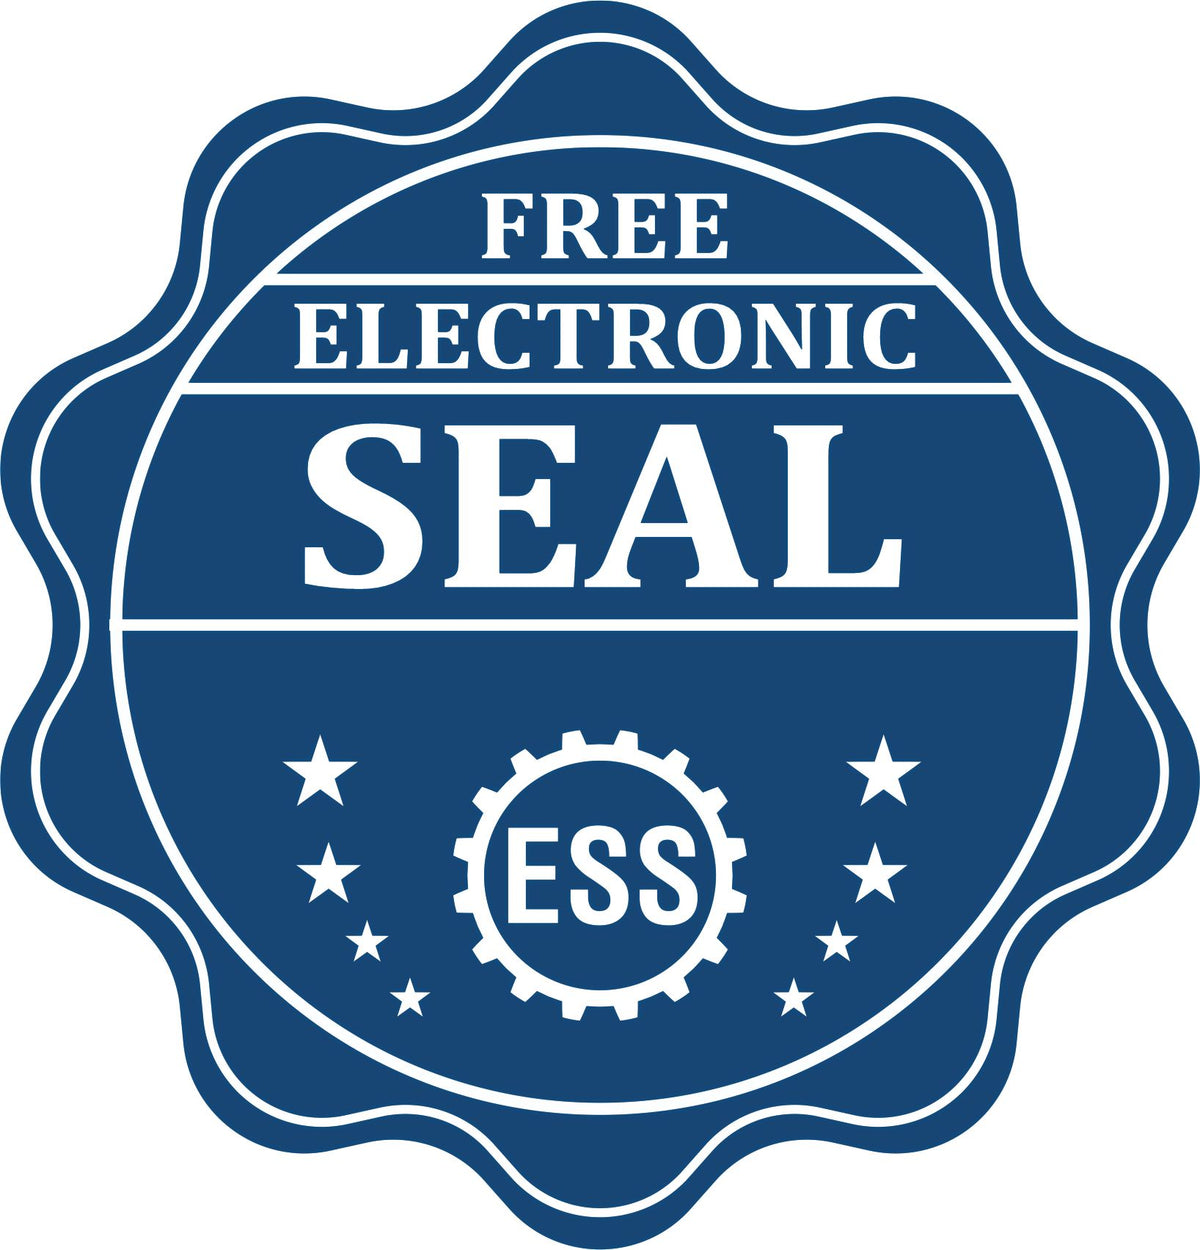 A badge showing a free electronic seal for the State of Rhode Island Soft Land Surveyor Embossing Seal with stars and the ESS gear on the emblem.